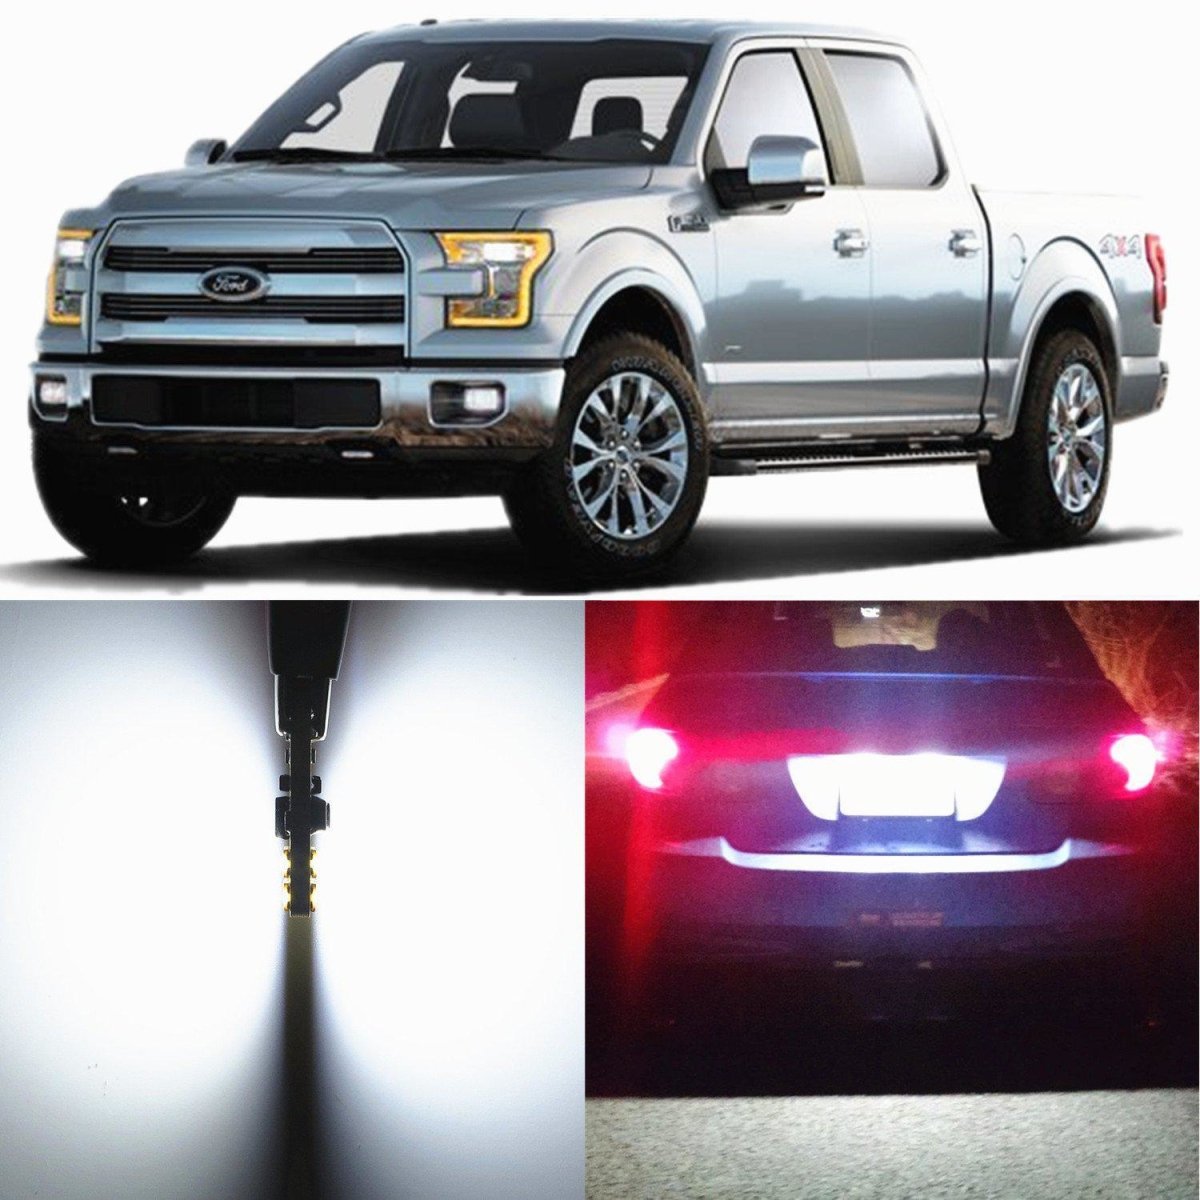 2pcs LED License Plate Light Replacement for Ford F150 F250 F350